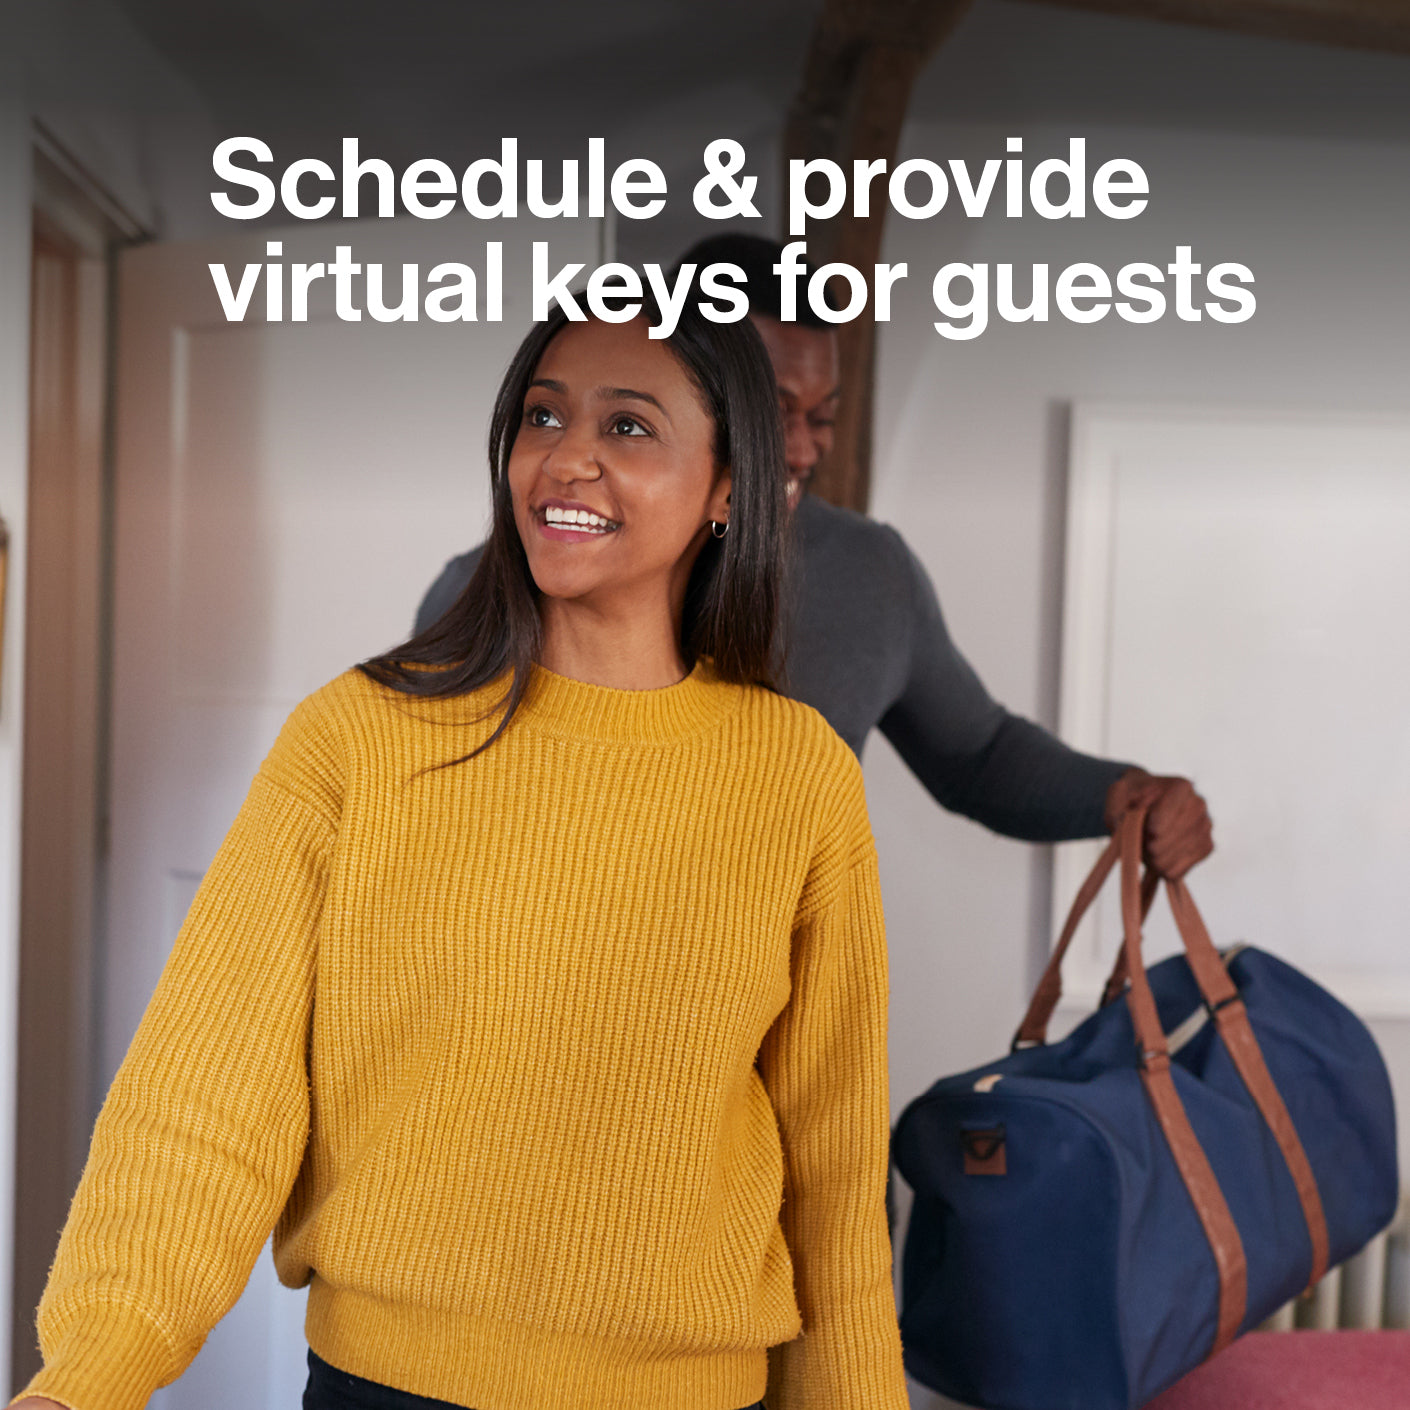 Aladdin Connect allows virtual keys for guests